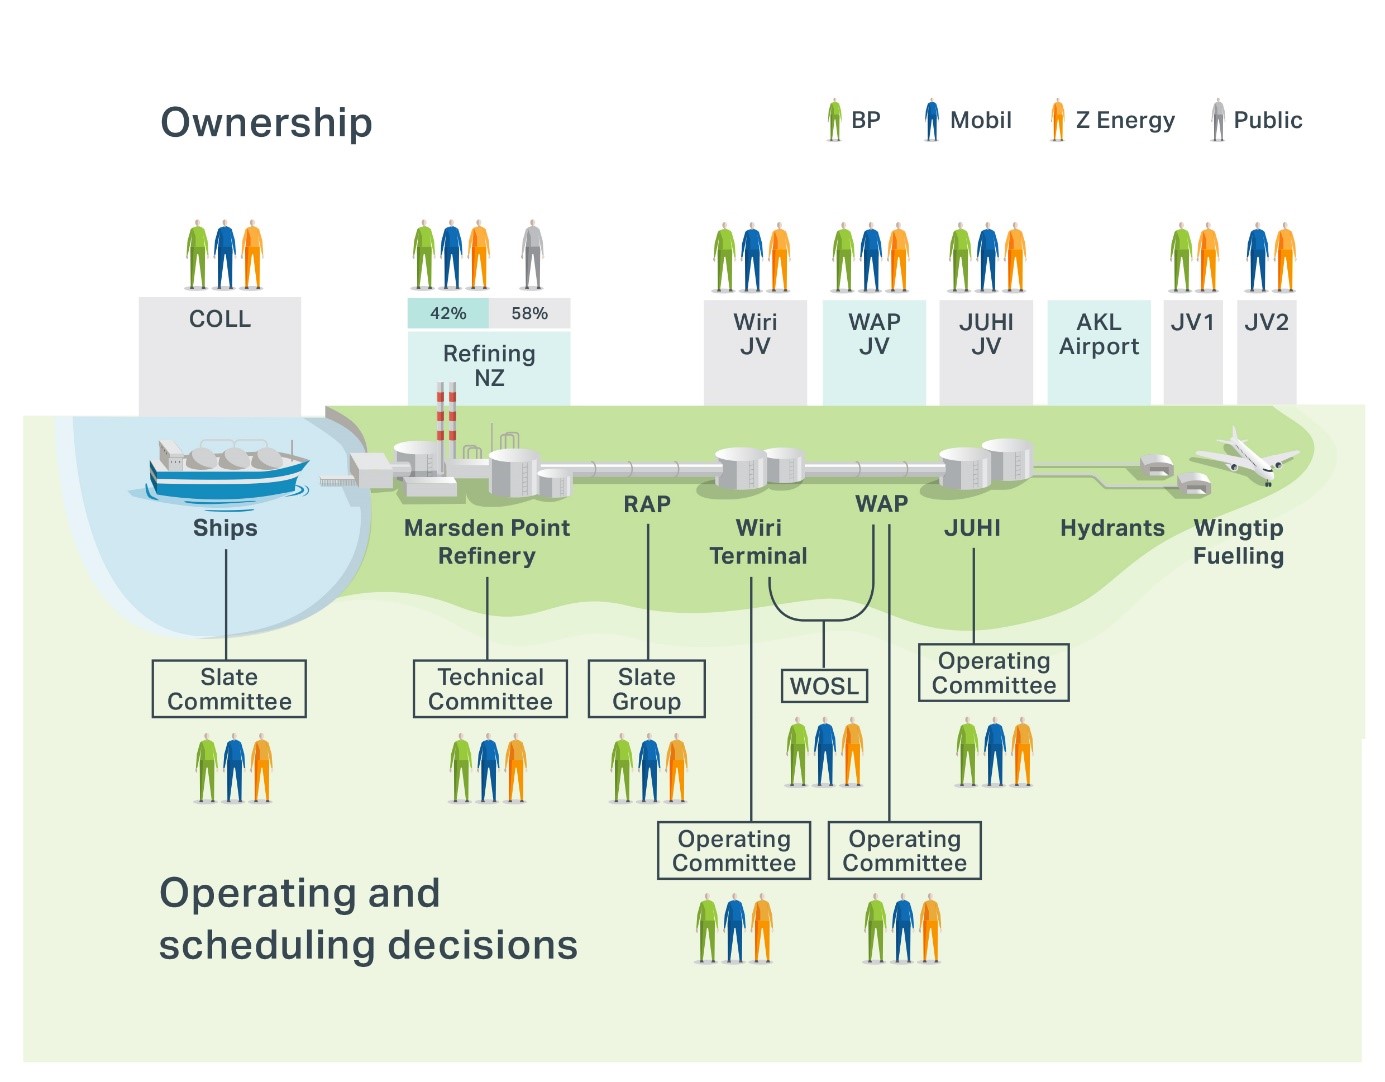 Diagram showing ownership of each stage of the fuel supply chain, as well as who is responsible for operating and scheduling decisions. The 4 main parties identified are BP, Mobil, Z Energy, and Publicly owned:  Ownership; a) Ships - collectively owned by BP, Mobil, and Z Energy.  b) Marsden Point Refinery - owned by Refining NZ.  Refining NZ is 42% owned by BP, Mobil, Z Energy, and 58% Publicly owned.  c) RAP – ownership not shown d) Wiri Terminal - joint venture between BP, Mobil, and Z Energy.  e) WAP- joint venture between BP, Mobil, and Z Energy.  f) JUHI - joint venture between BP, Mobil, and Z Energy. g) Hydrants - owned by AKL Airport.  h) Wingtip Fuelling - two joint ventures. JV1 is between BP and Z Energy. JV2 is between Mobil and Z Energy. Operating and scheduling decisions; a) Ships - operated by a Slate Committee comprising of BP, Mobil, and Z Energy.  b) Marsden Point Refinery - operated by a Technical Committee comprising of BP, Mobil, and Z Energy.  c) RAP - operated by a Slate Committee comprising of BP, Mobil, and Z Energy.  d) Wiri Terminal - Operating Committees and a WOSL with representatives from BP, Mobil, and Z Energy.  e) WAP - Operating Committees and a WOSL with representatives from BP, Mobil, and Z Energy. f) JUHI - Operating Committee with representatives from BP, Mobil, and Z Energy.